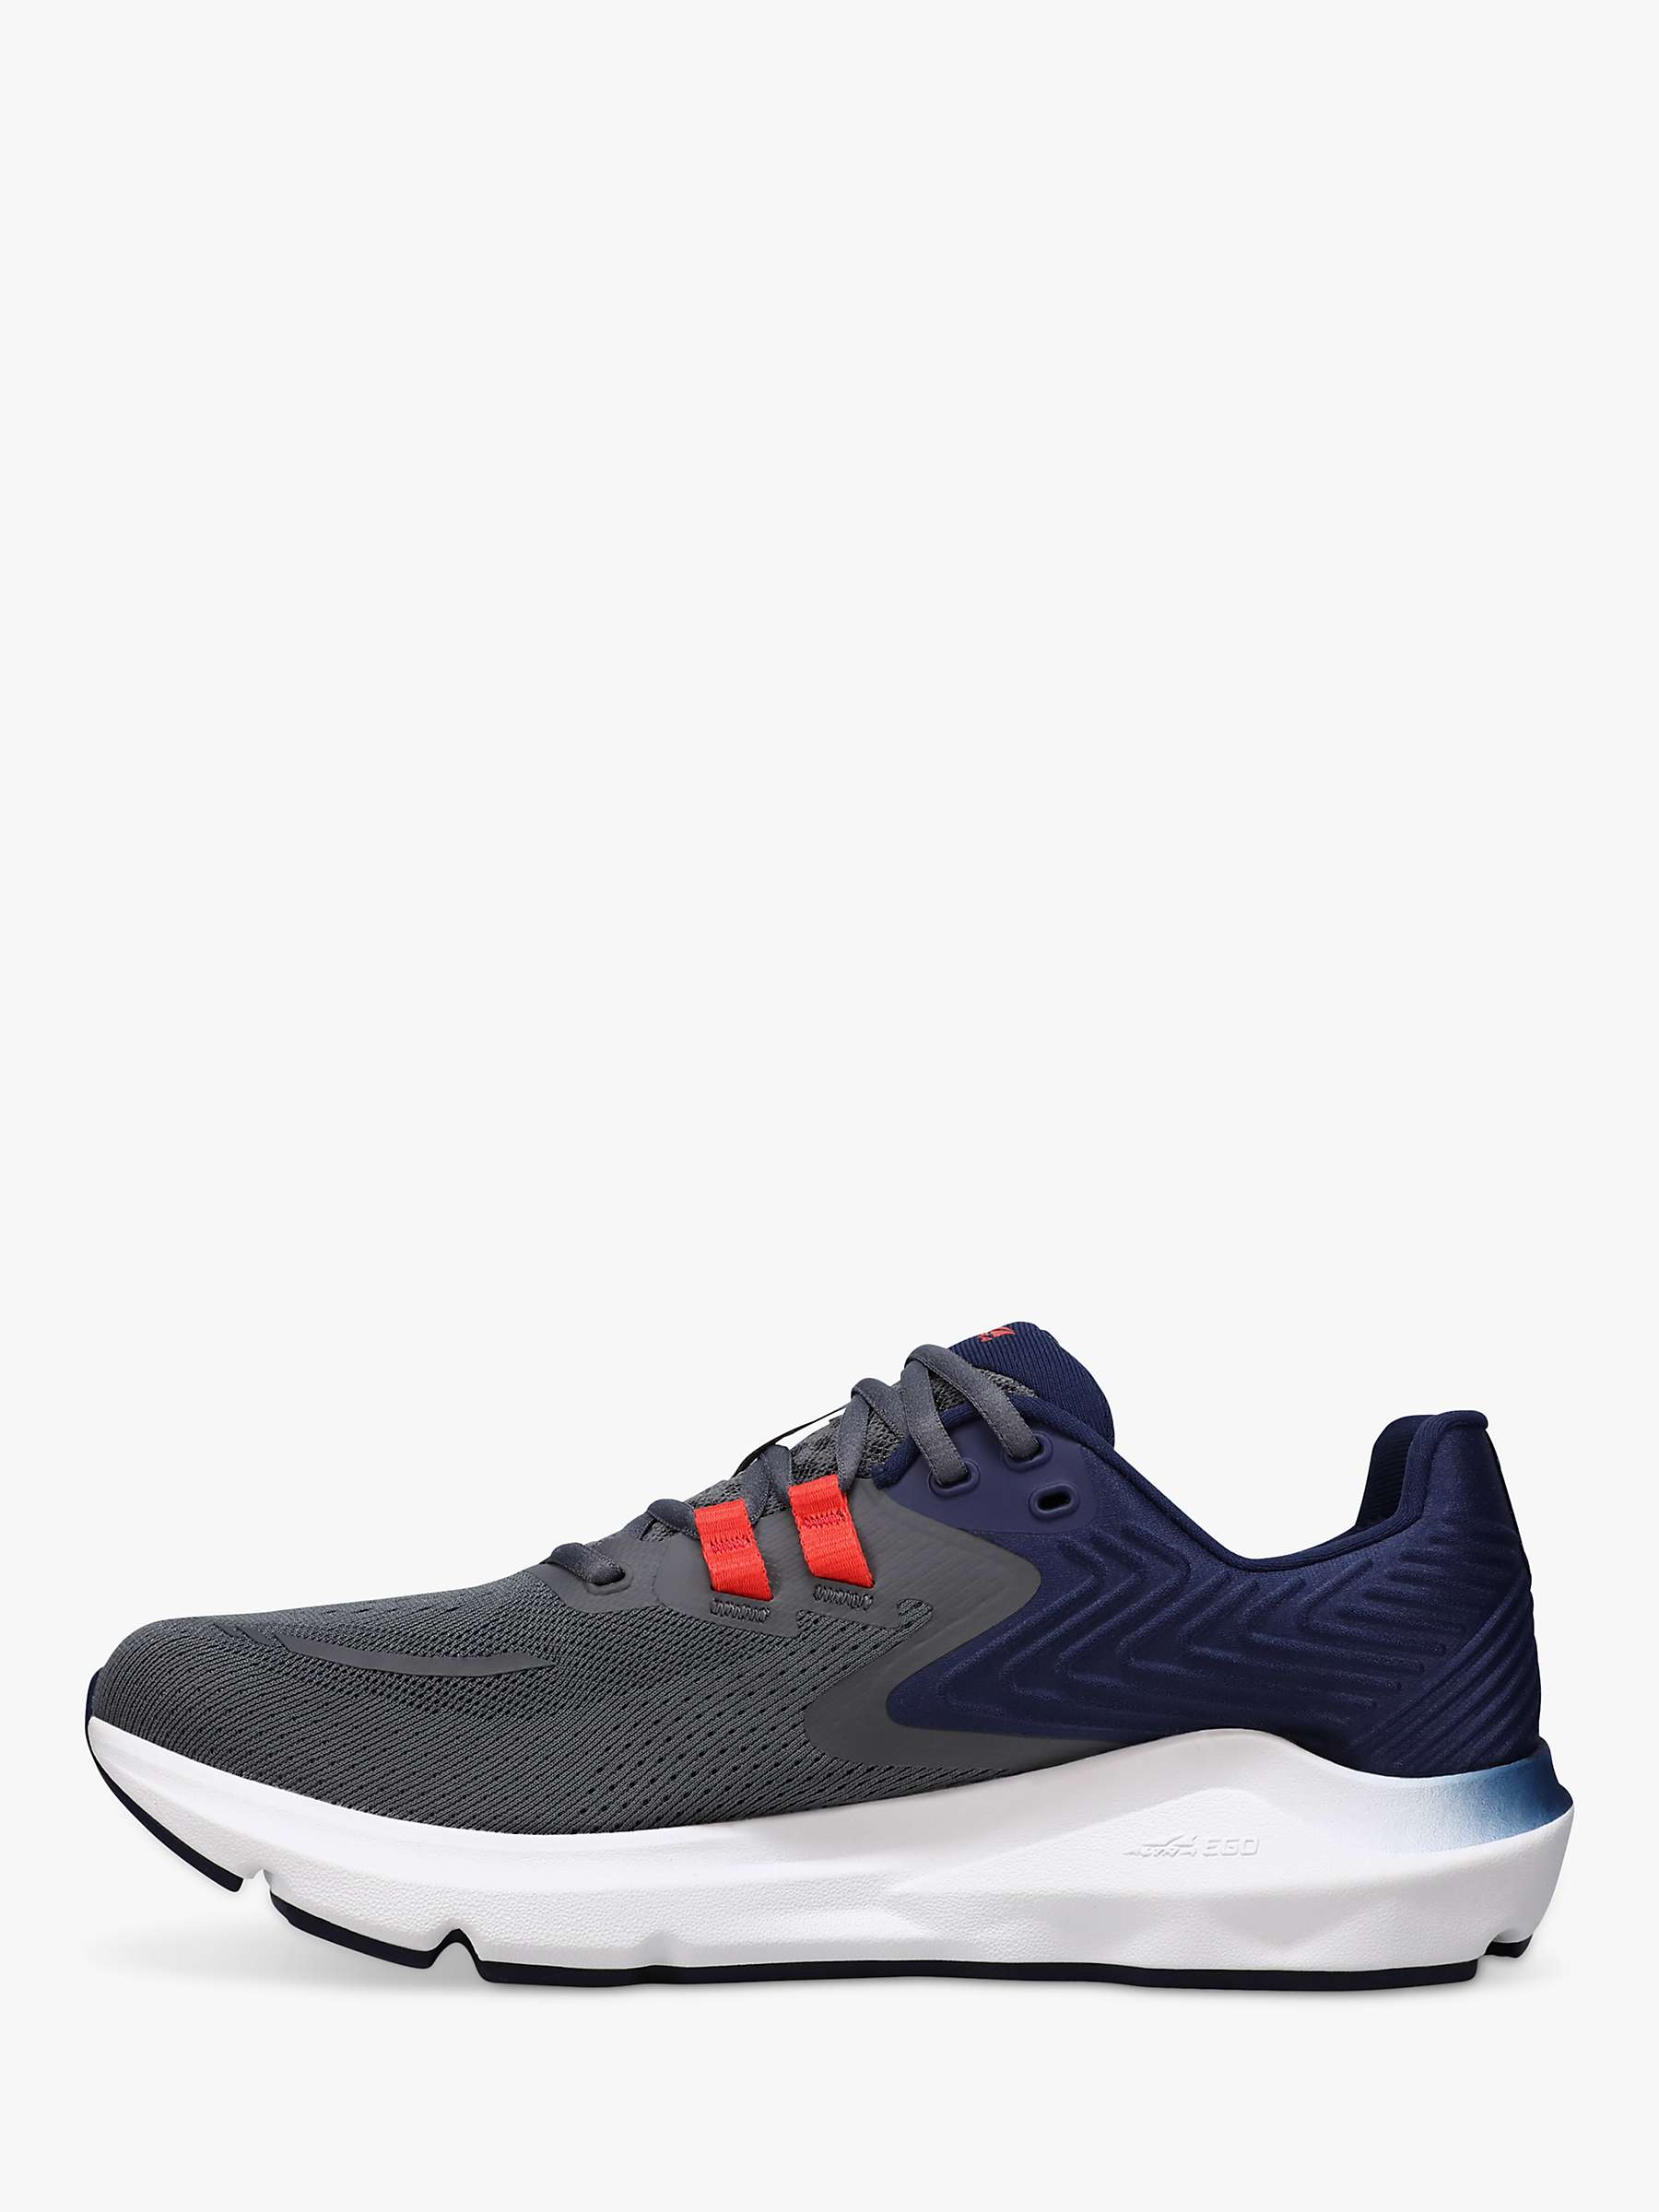 Buy Altra Provision 7 Men's Running Shoes Online at johnlewis.com